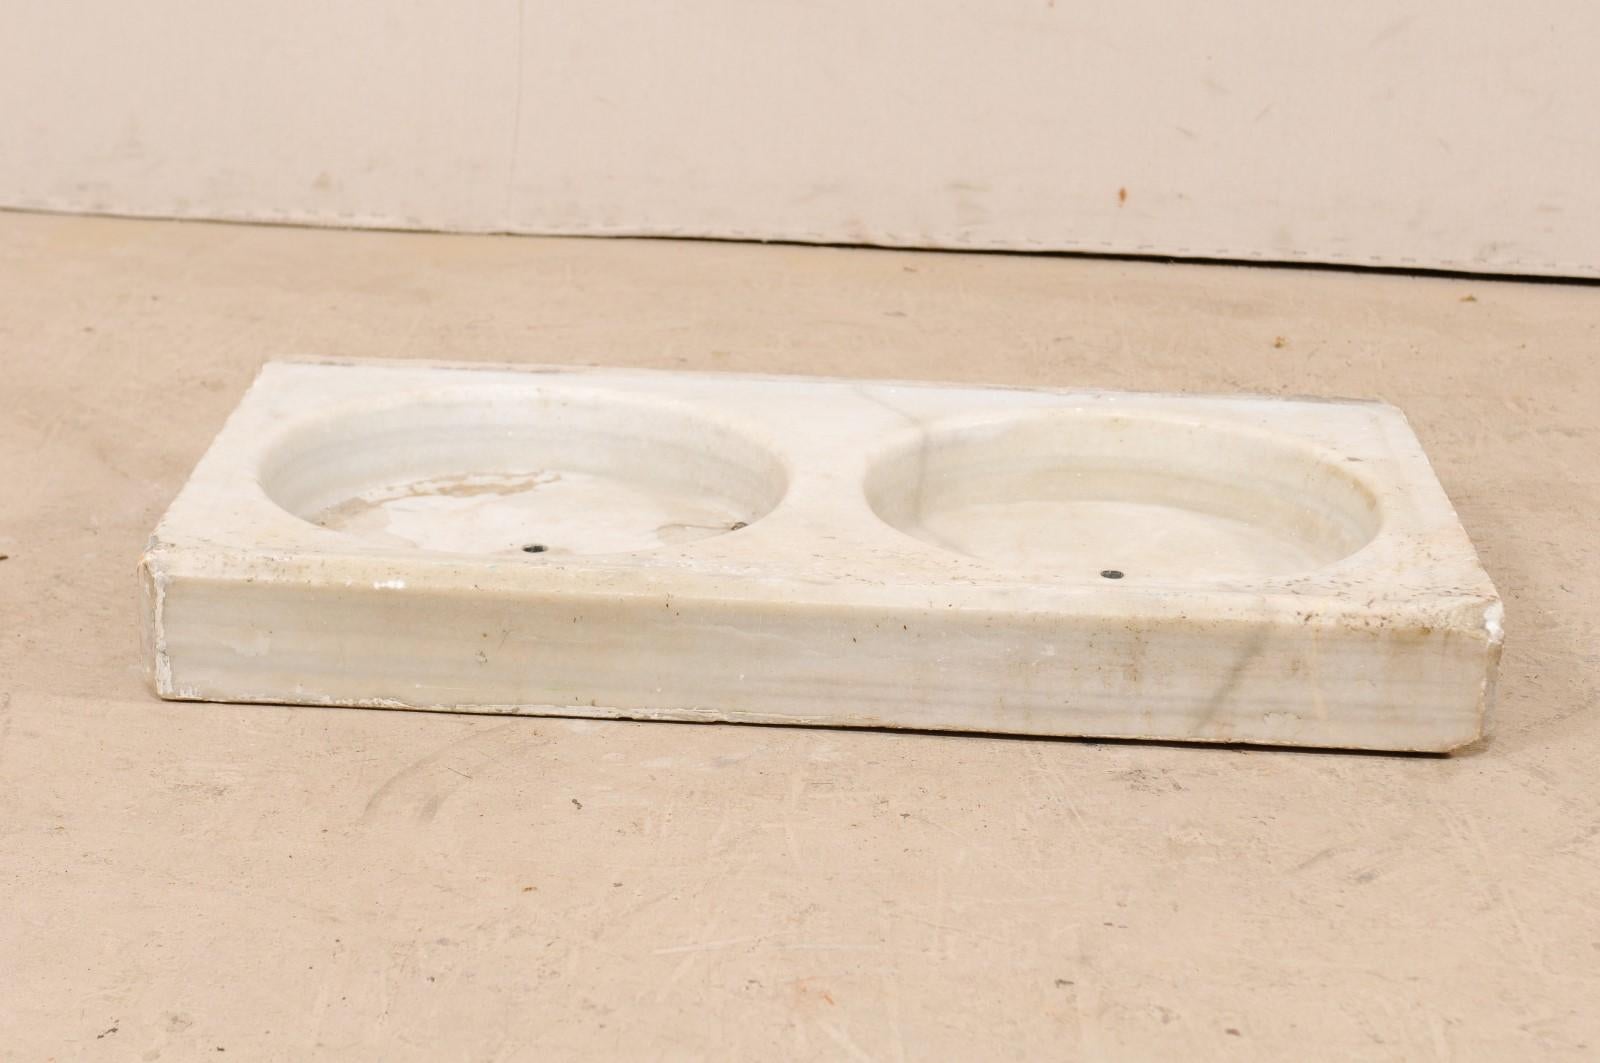 A French double basin sink of carved marble from the 19th century. This antique hand-carved marble sink from France has an overall rectangular-shape, and set with a pair of perfectly round, shallow basins. There is a small drain hole at the centre